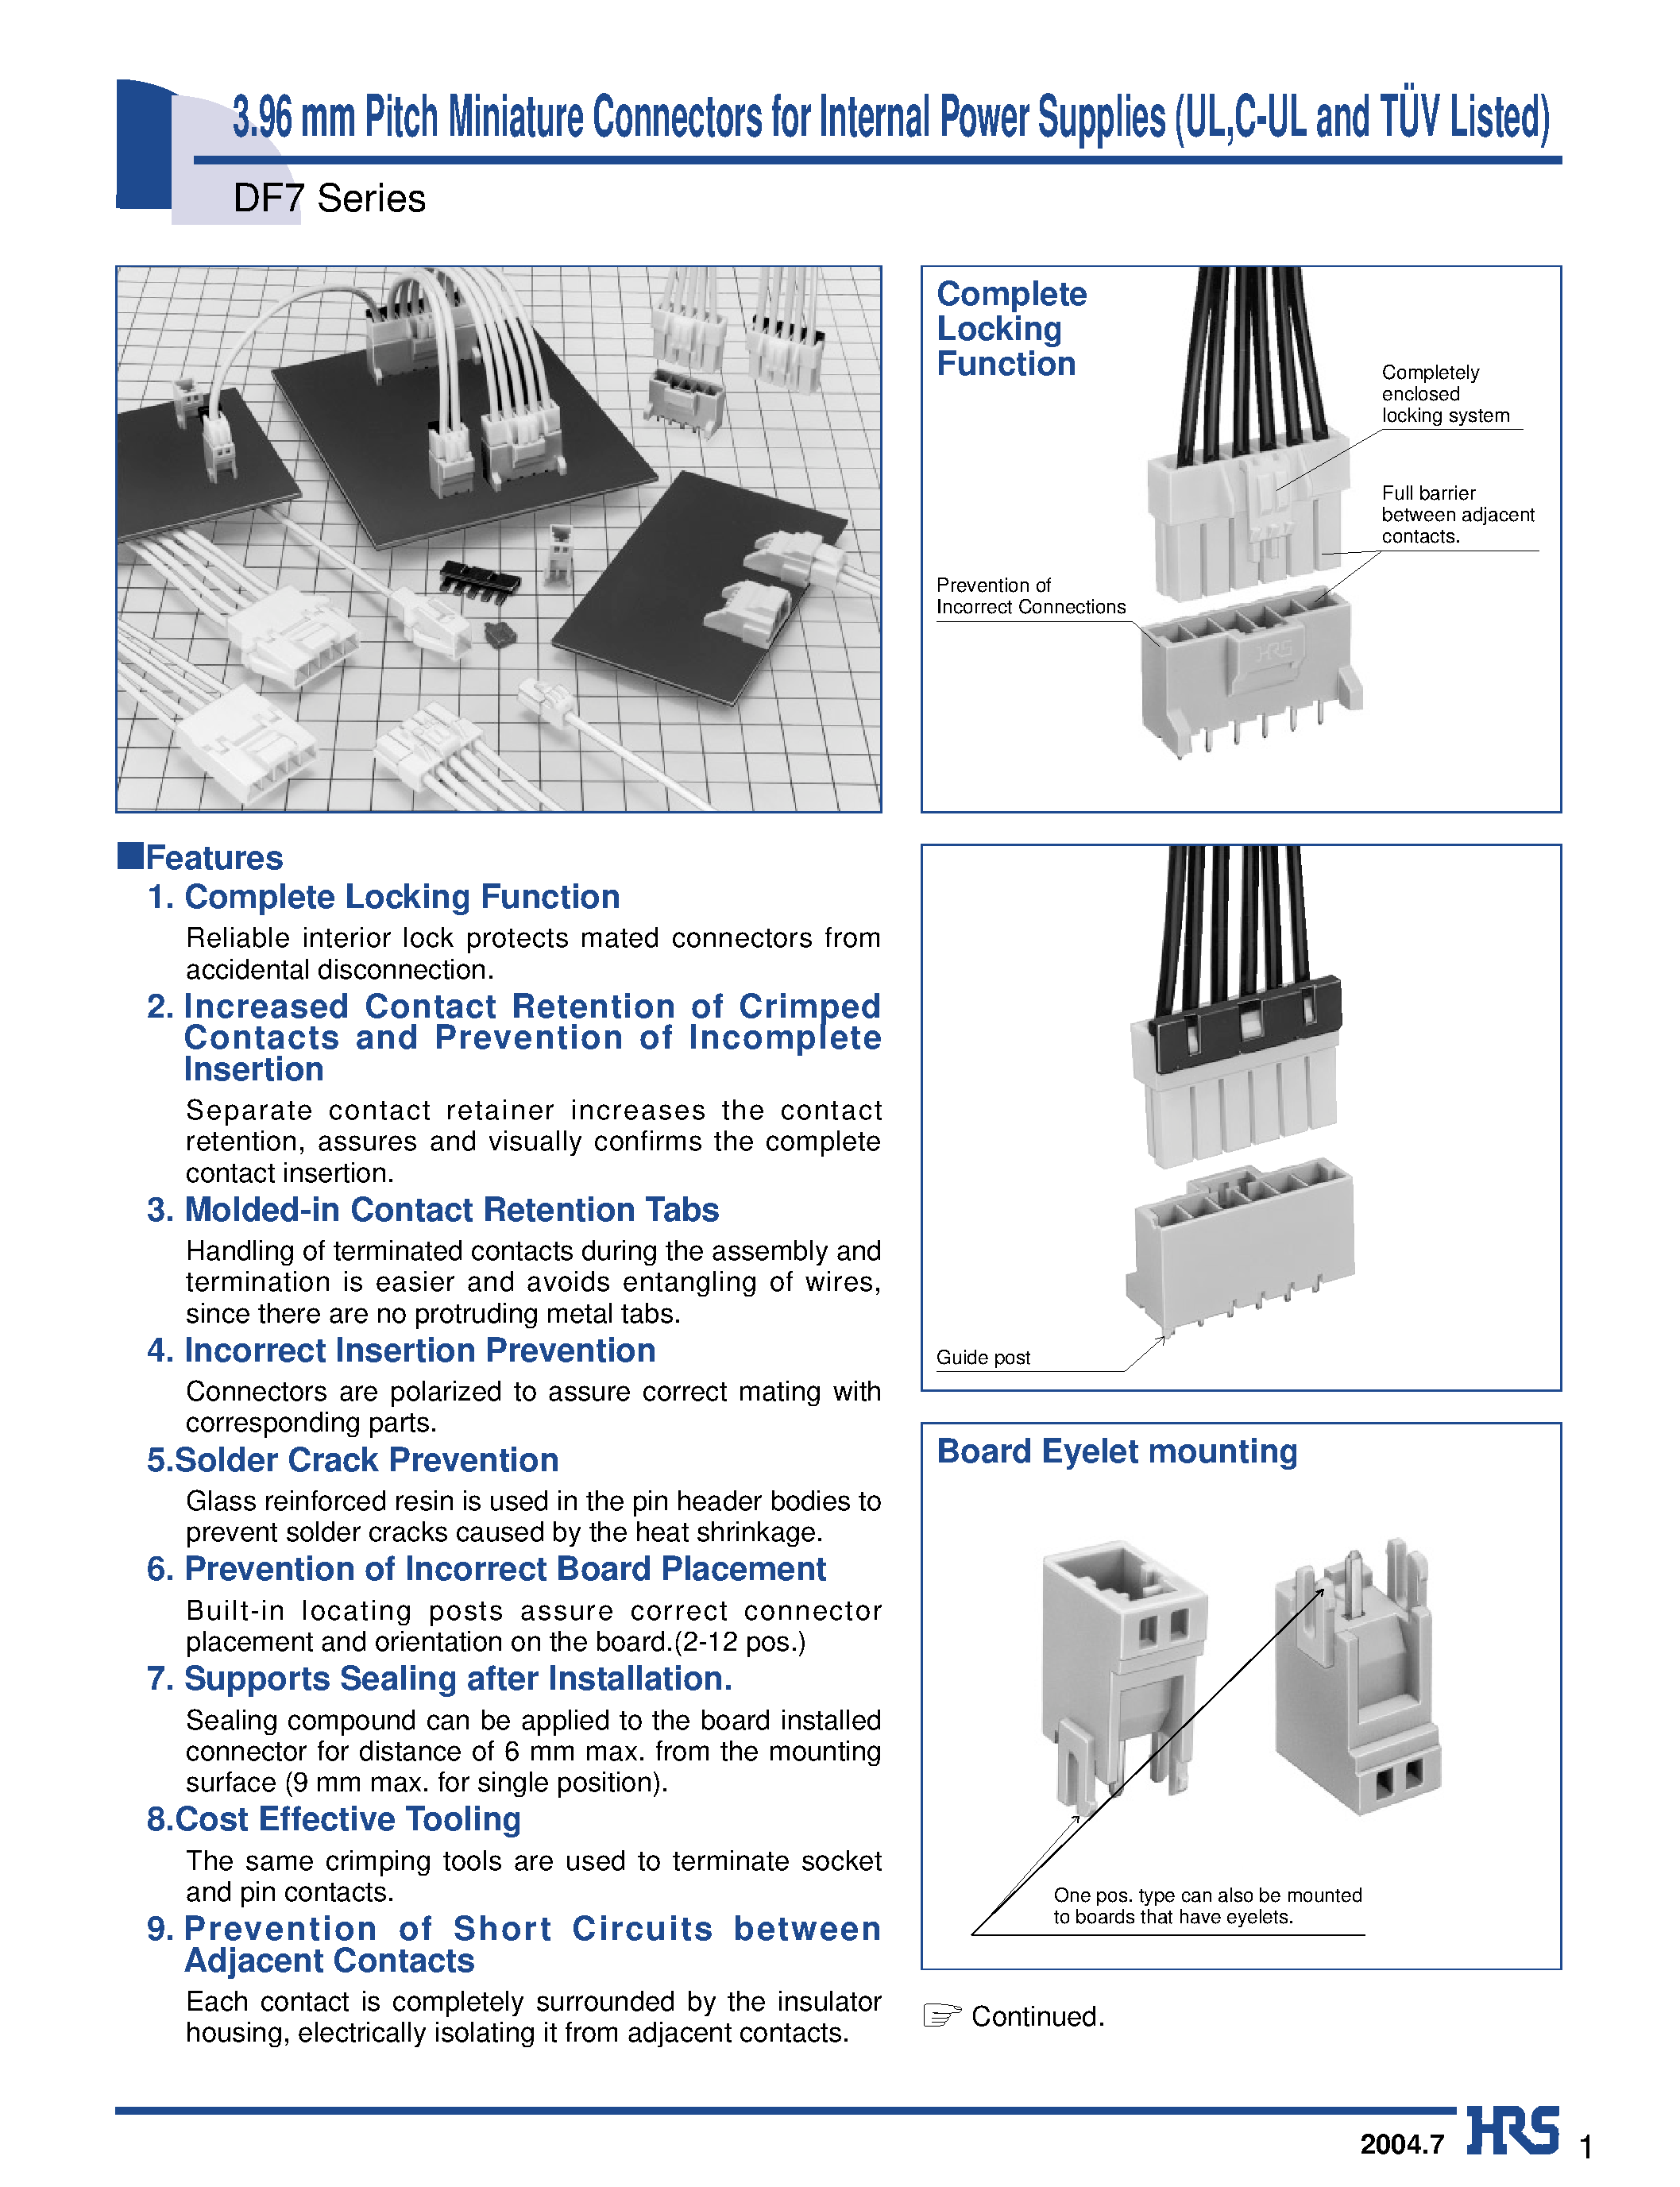 Datasheet DF7-3S-3.96C - 3.96 mm Pitch Miniature Connectors for Internal Power Supplies (UL /C-UL and TUV Listed) page 1